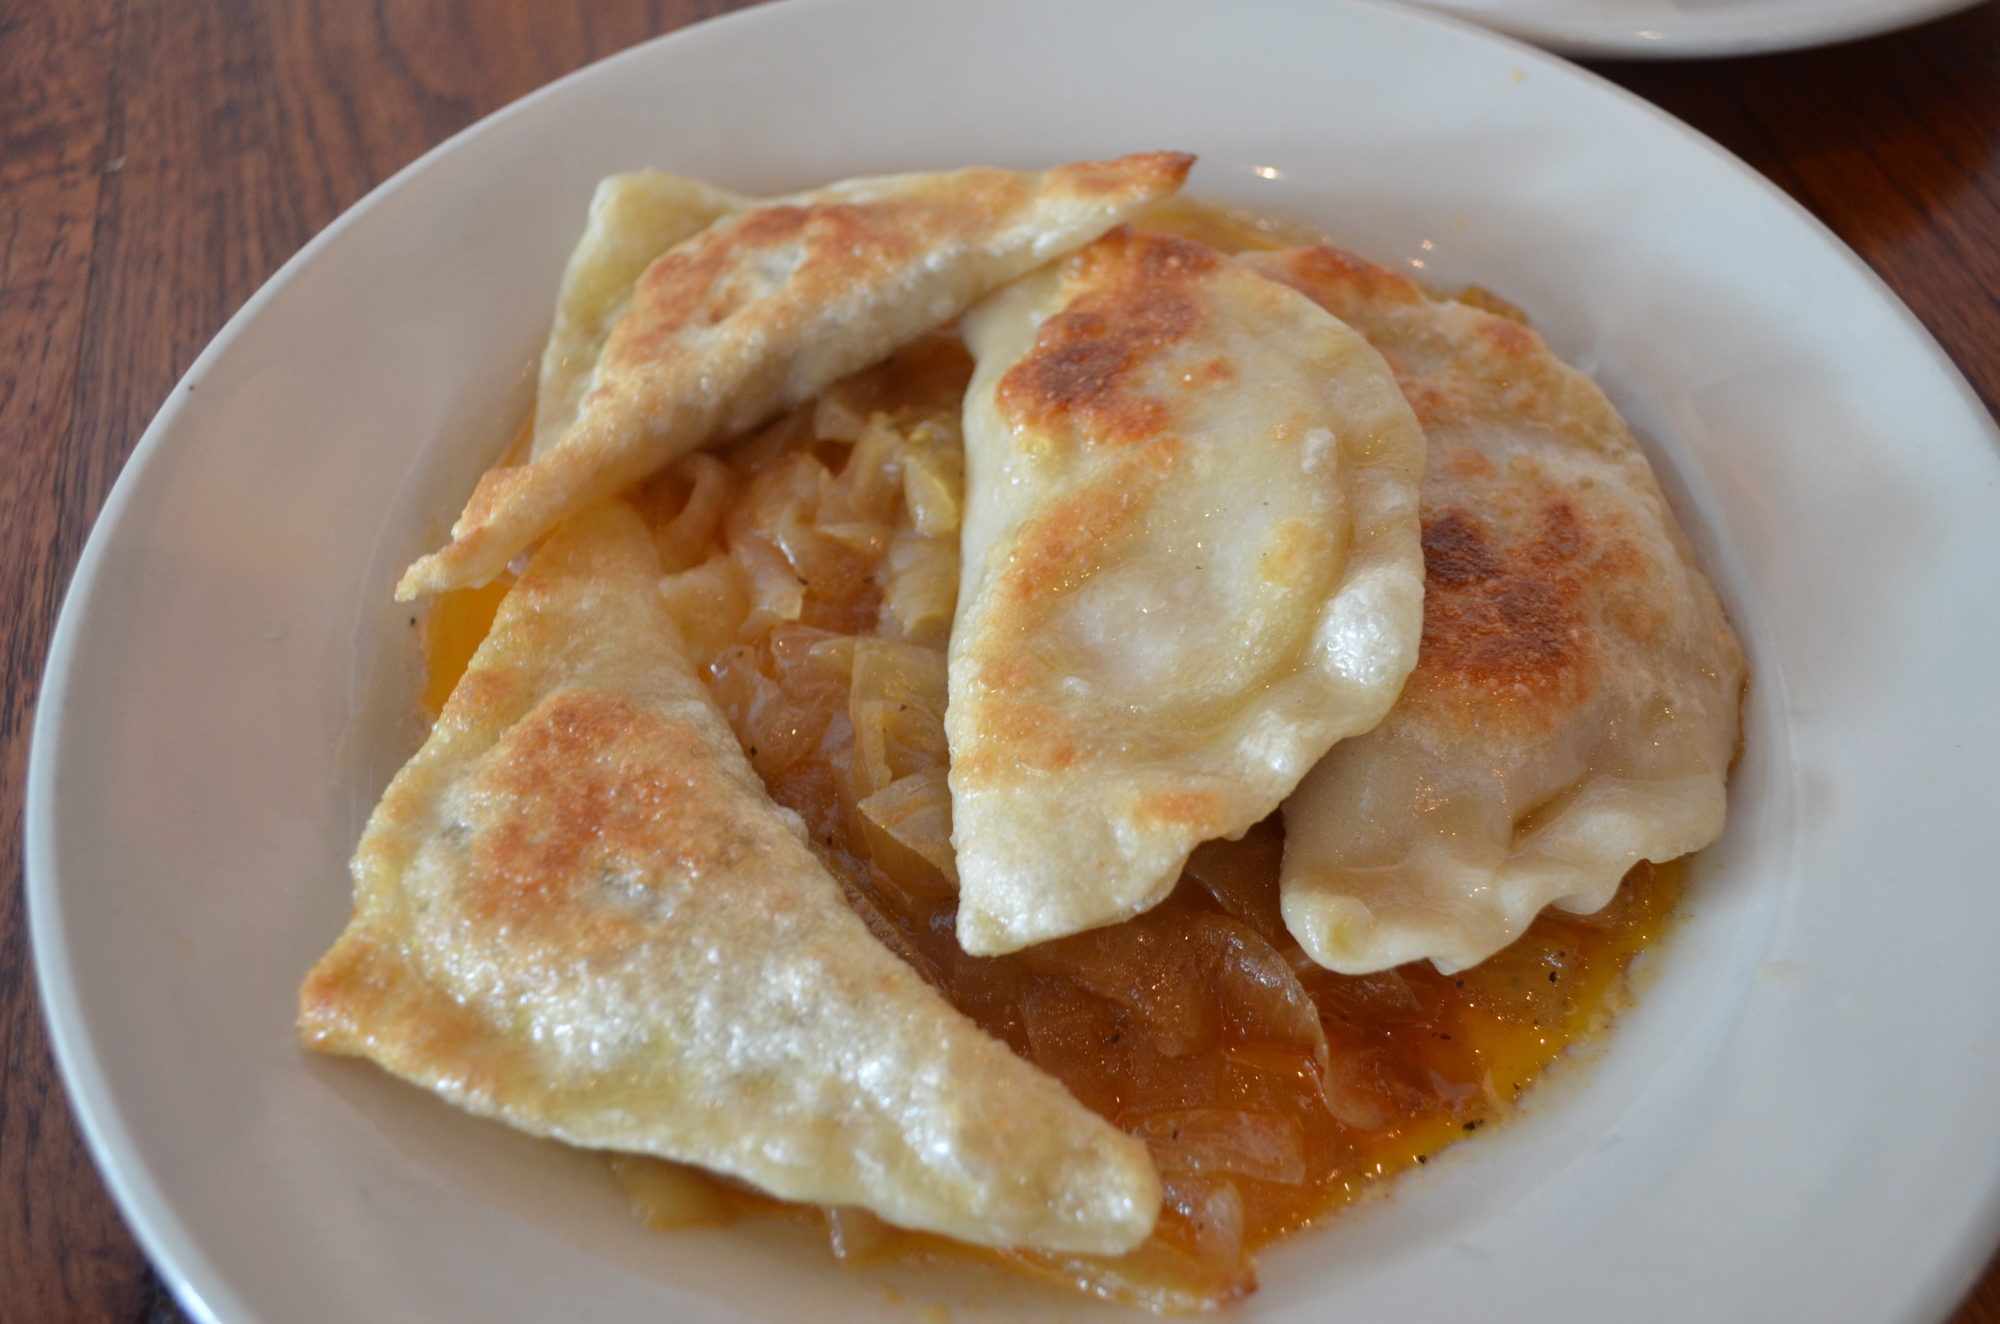 Pan Fried Cheese Kreplach: A Polish favorite, these are small dumplings cooked in chicken stock and then filled with cheese, meat or potatoes.